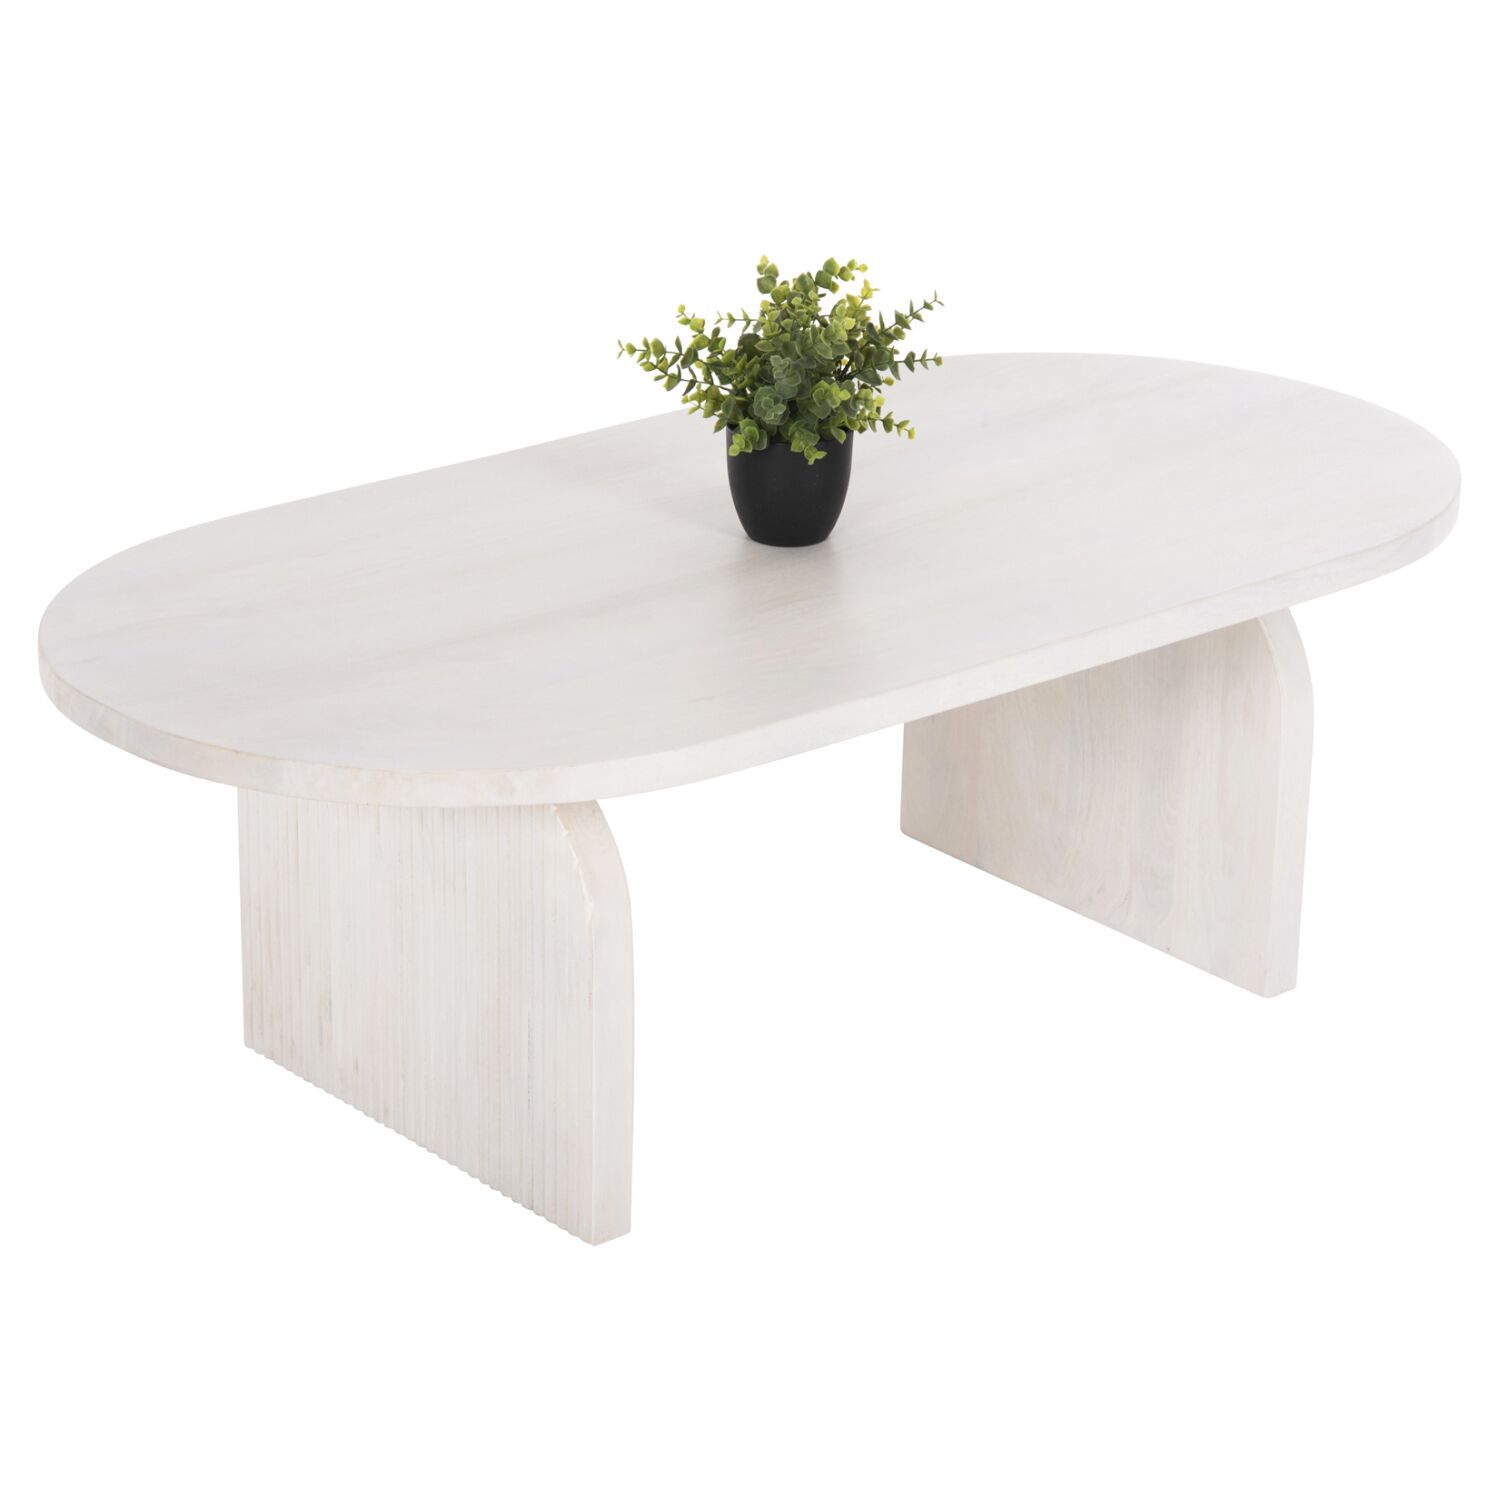 COFFEE TABLE OVAL HONKY HM9691 SOLID MANGO WOOD IN WHITE 120x60x40Hcm.